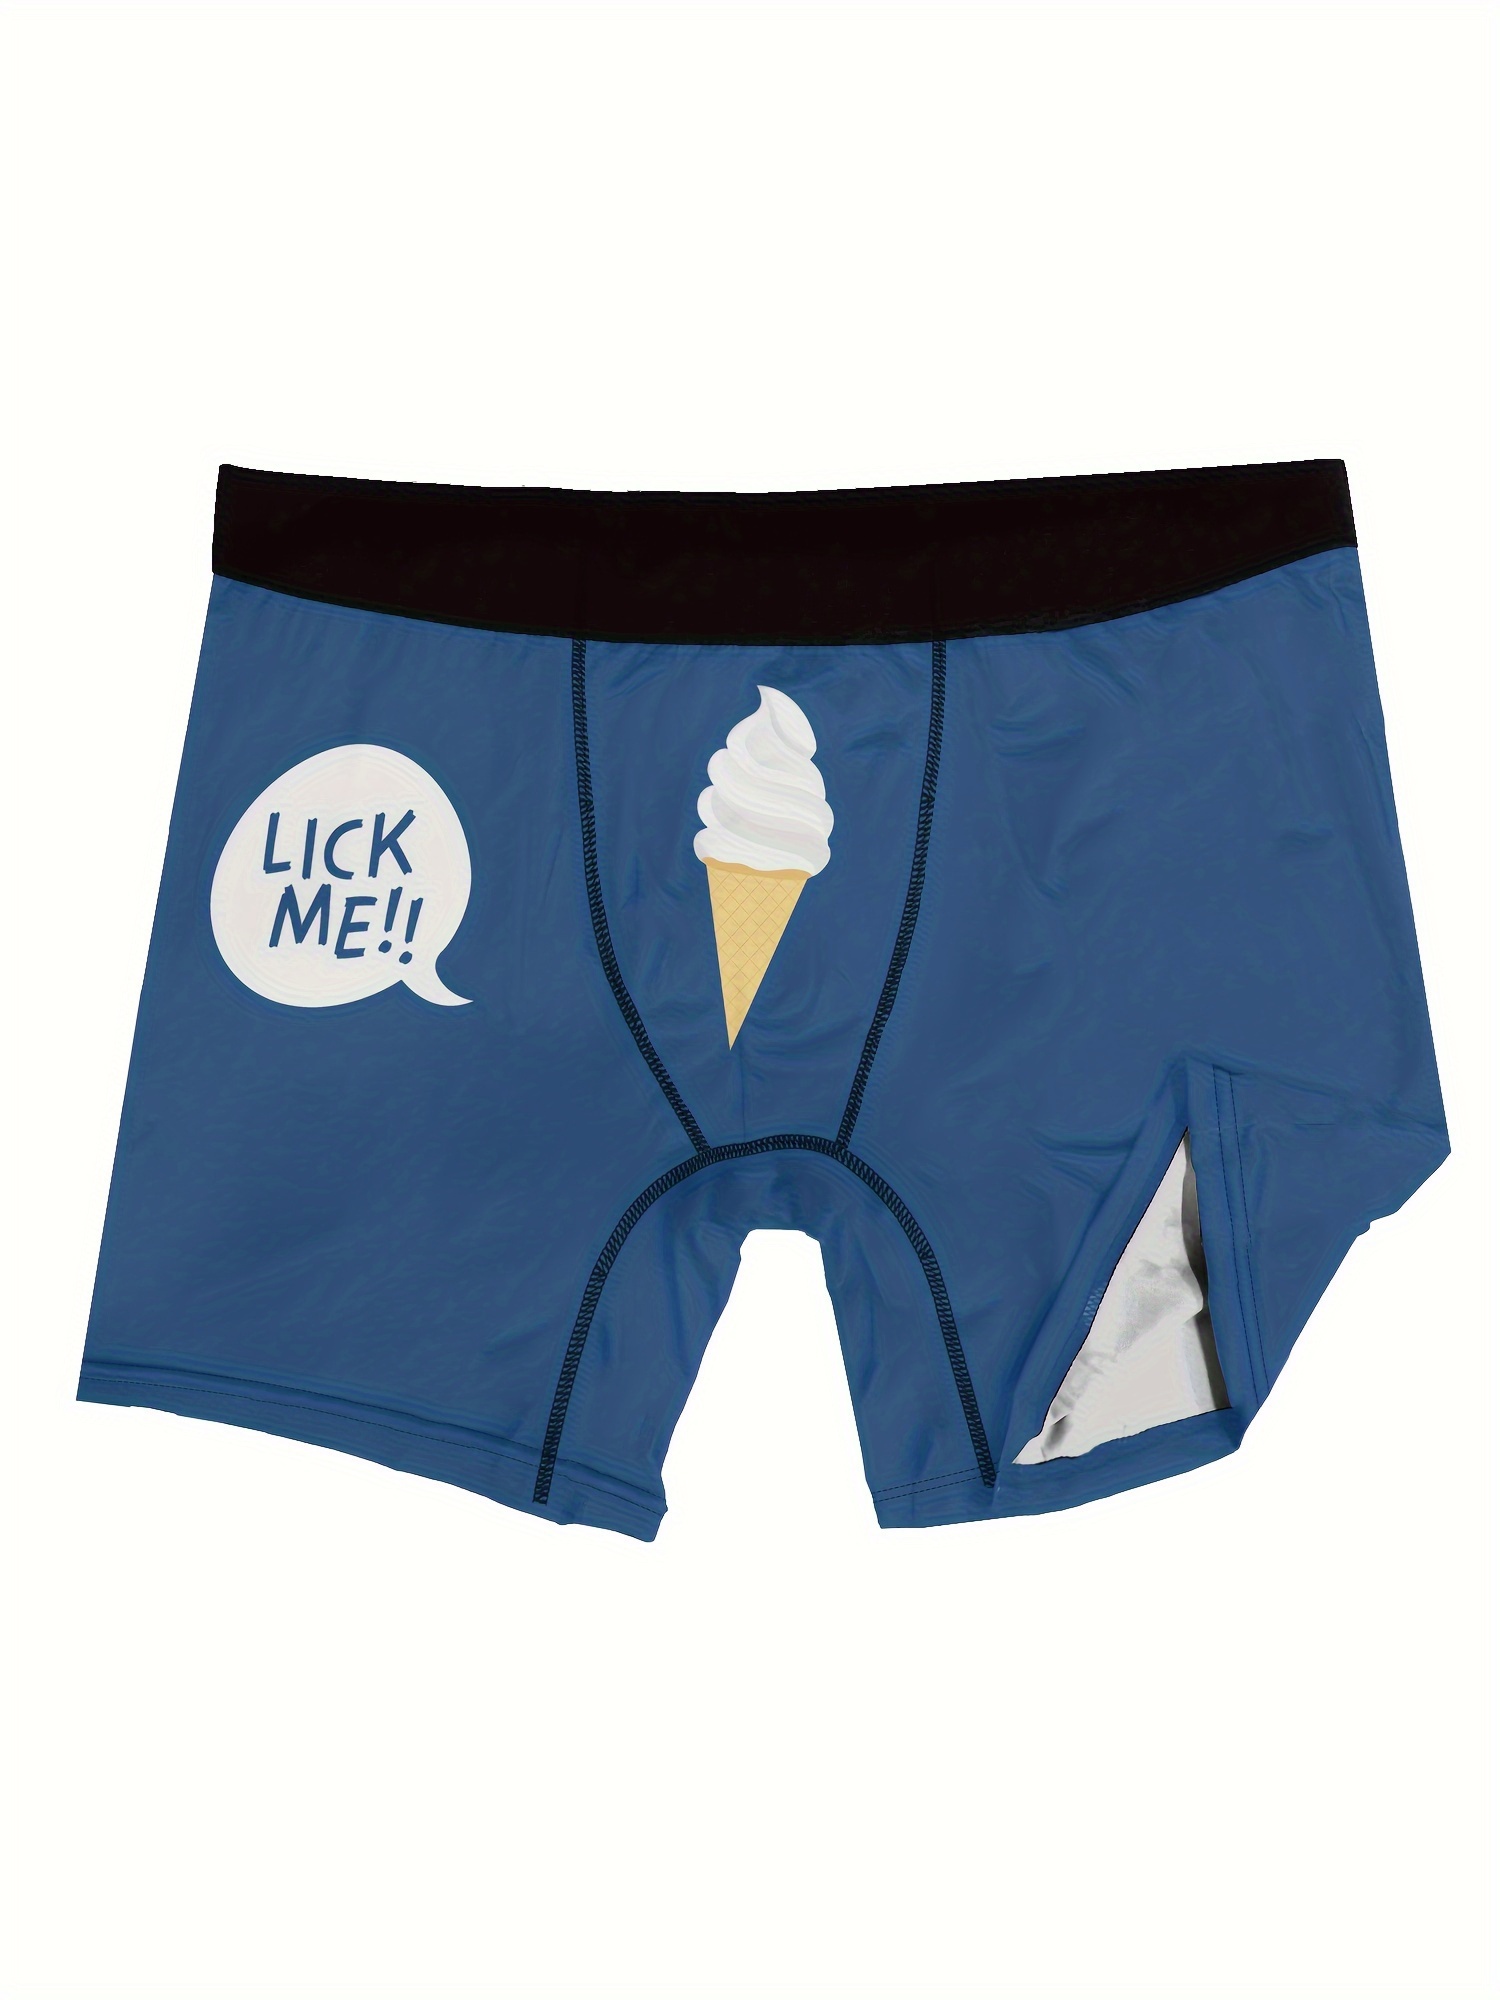 Men's Ice Cream Lick Me Digital Print Boxers Briefs, Novelty Funny Boxers  Trunks, Breathable Comfy Stretchy Underpants, Men's Trendy Underwear